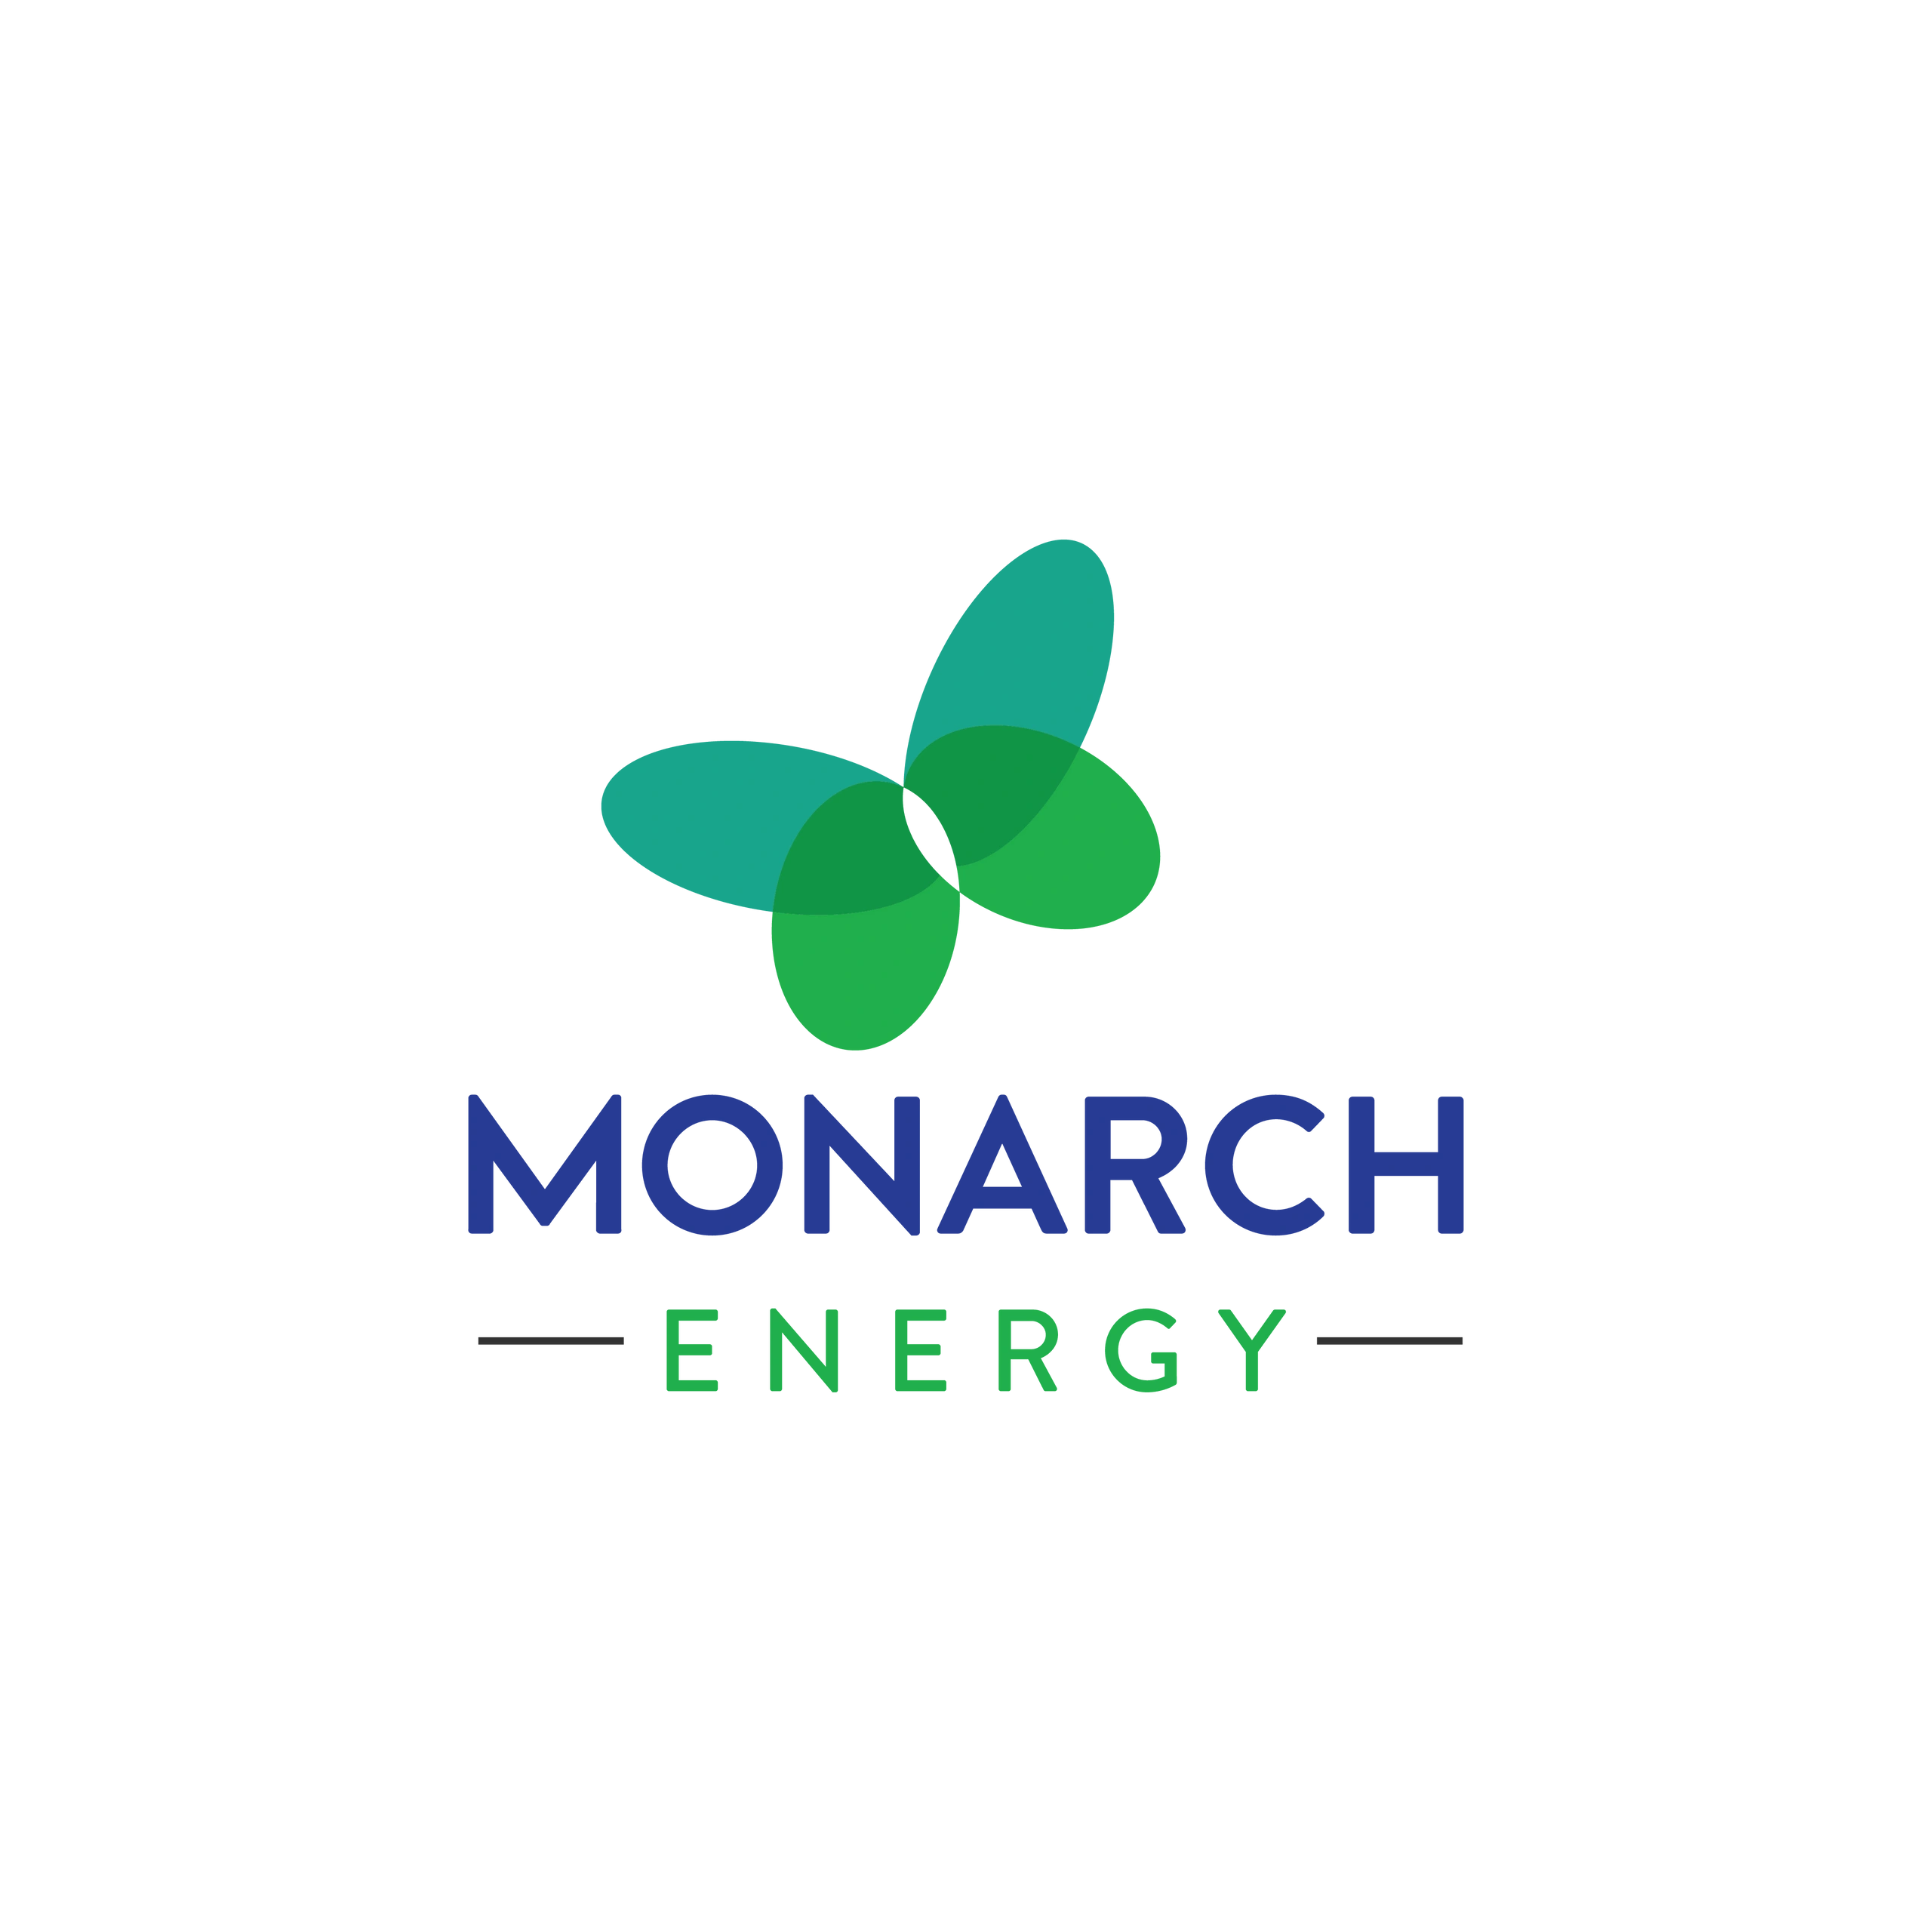 Renewable Energy Group – Newton Seeds Monarch Fueling Station